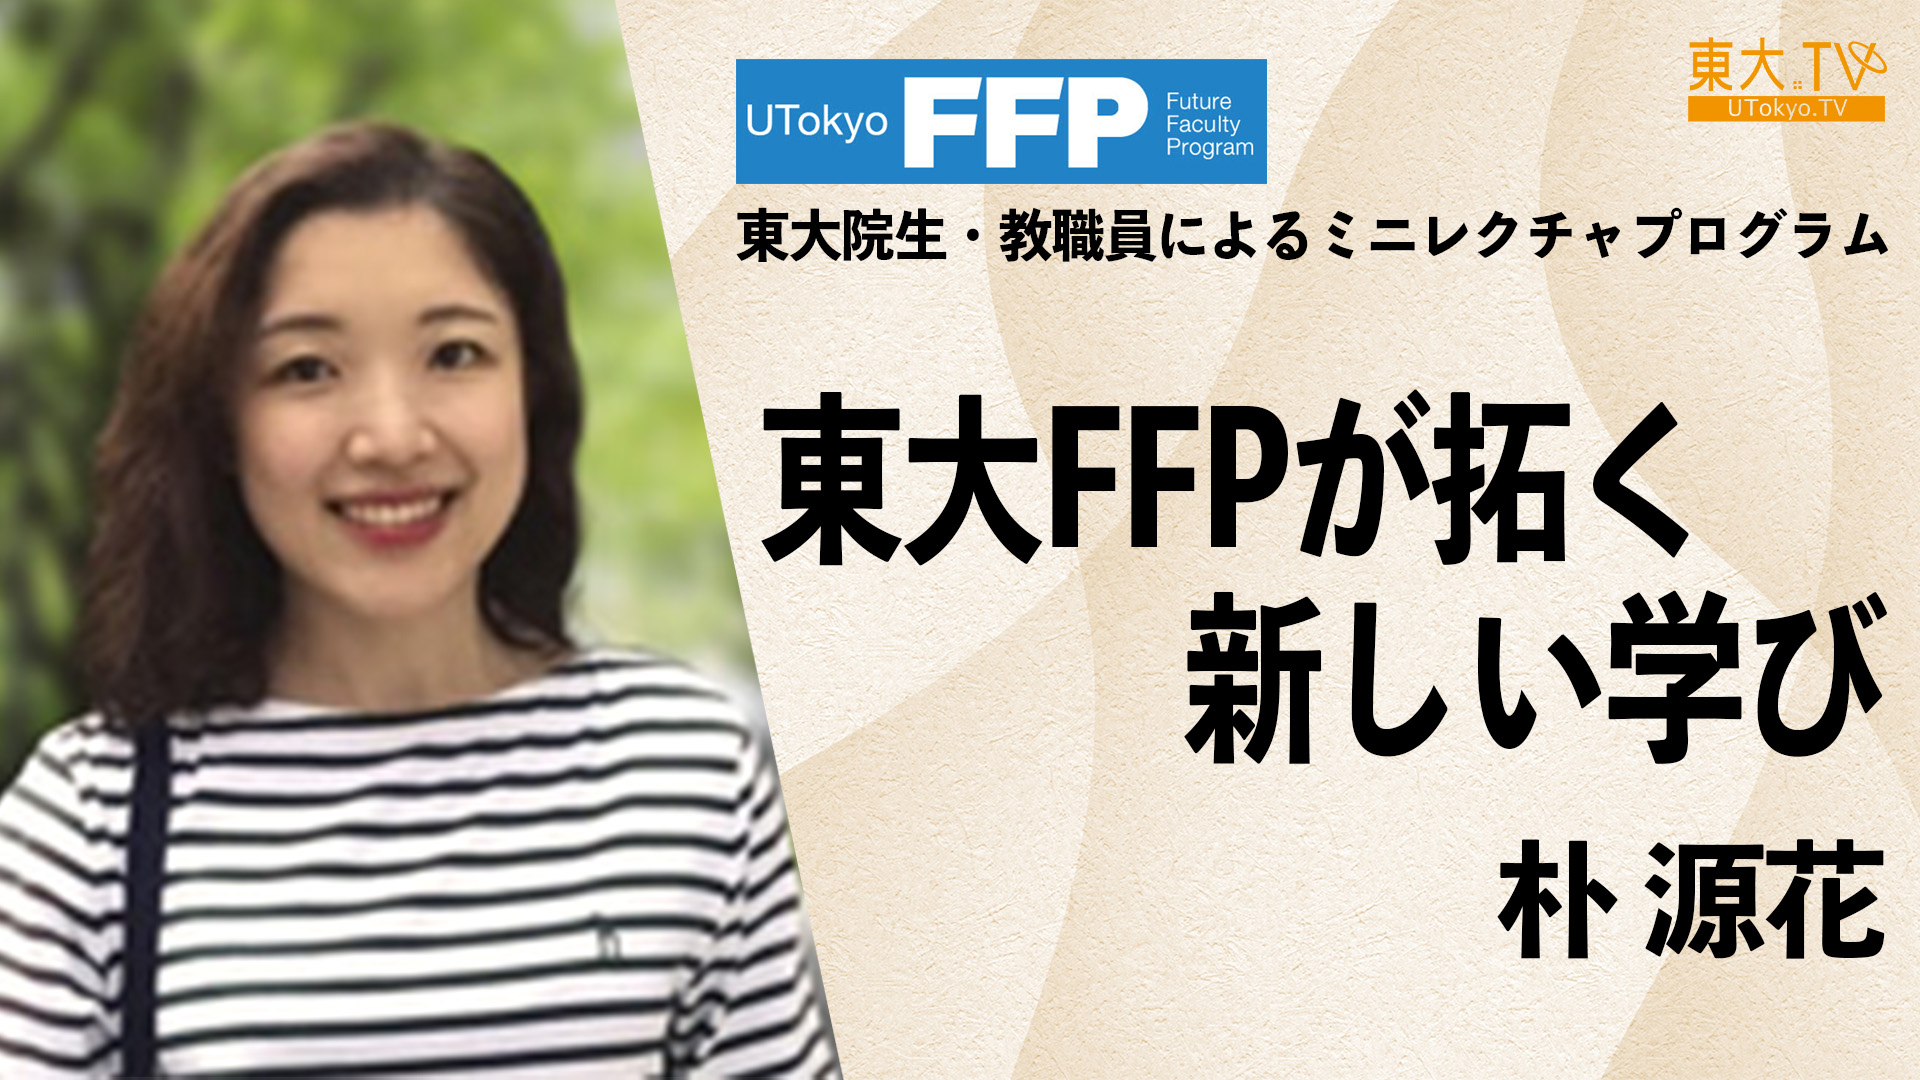 Introduction: UTokyo FFP's  challenge to new learning [JP]